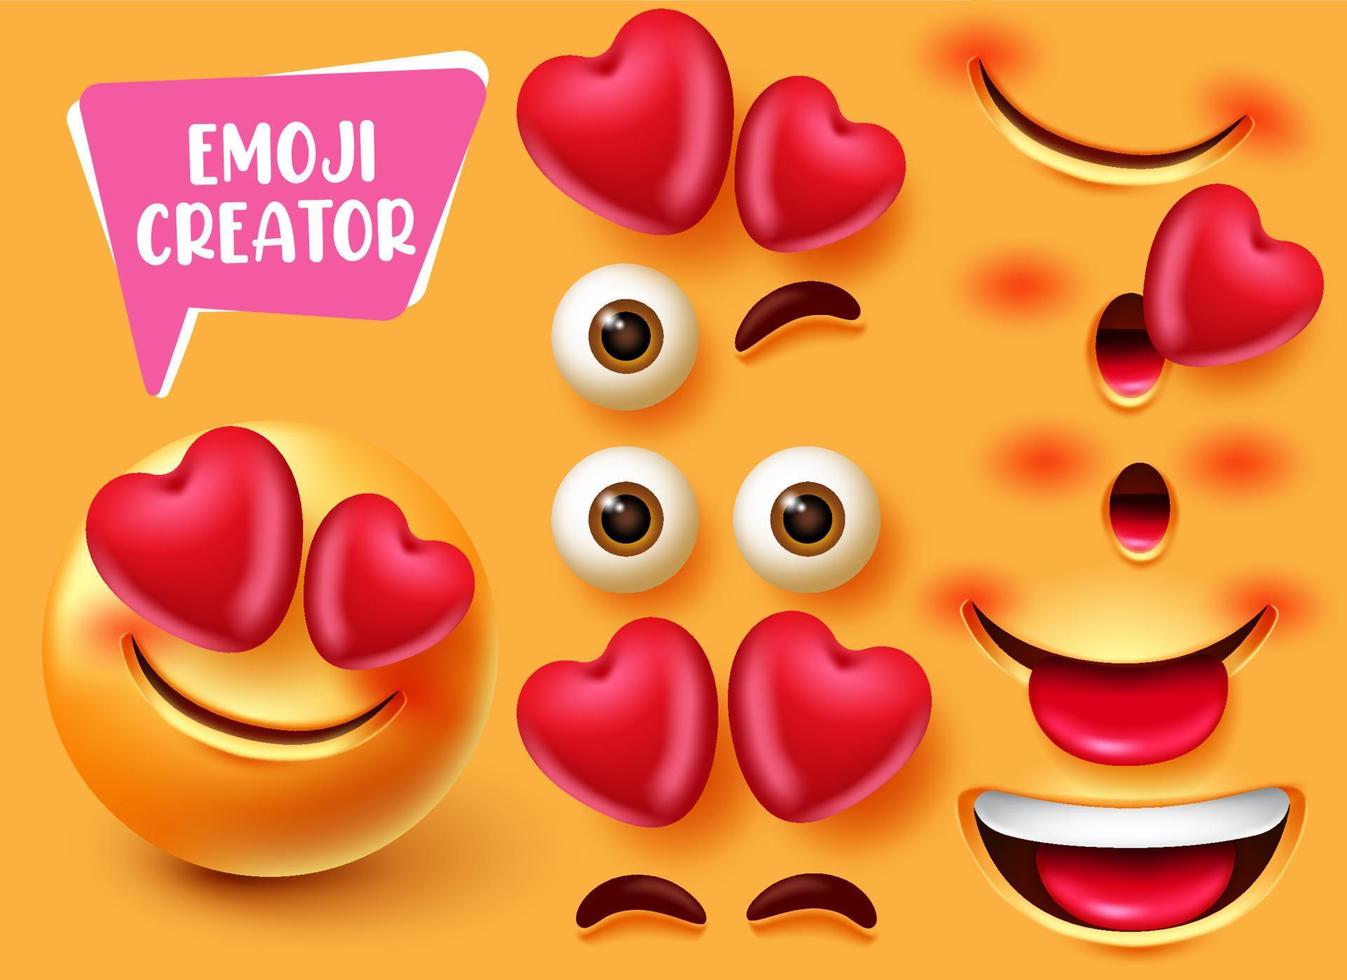 Emoji creator vector set design. Emoticon 3d in love and happy character with editable eyes, heart and mouth elements for cute facial expression emoticon. Vector illustration